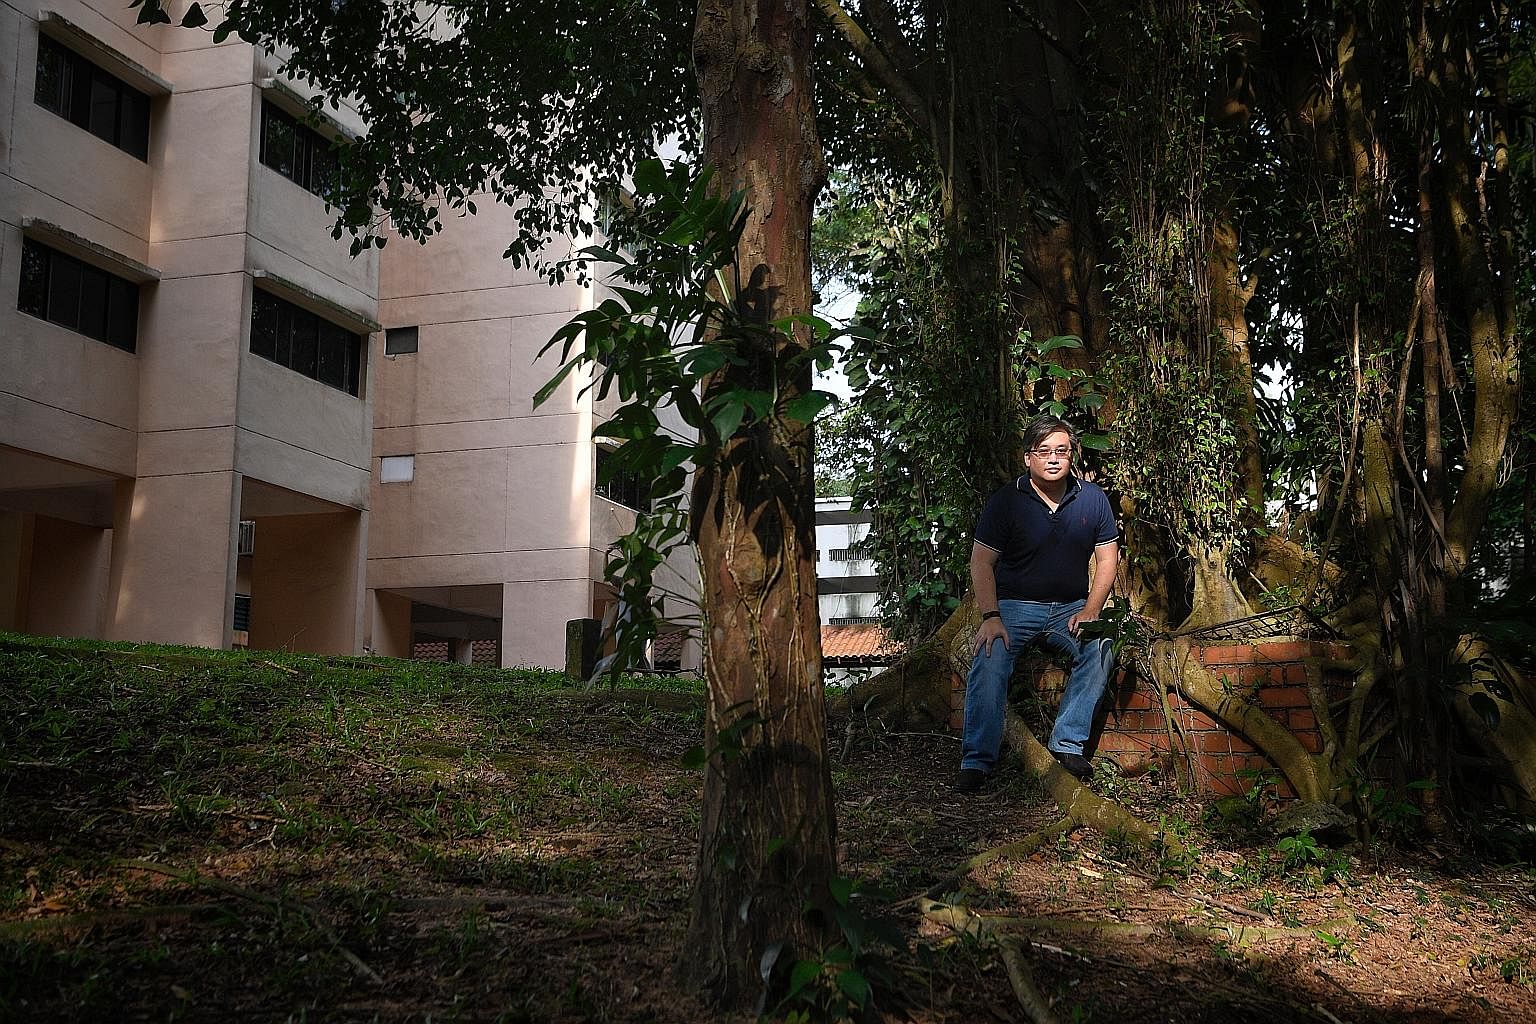 Left: Dr John Kwok, a research fellow at the S. Rajaratnam School of International Studies, at one of the shafts. Above: A Ficus tree growing over what appears to be a well or an underground shaft at Normanton Park.